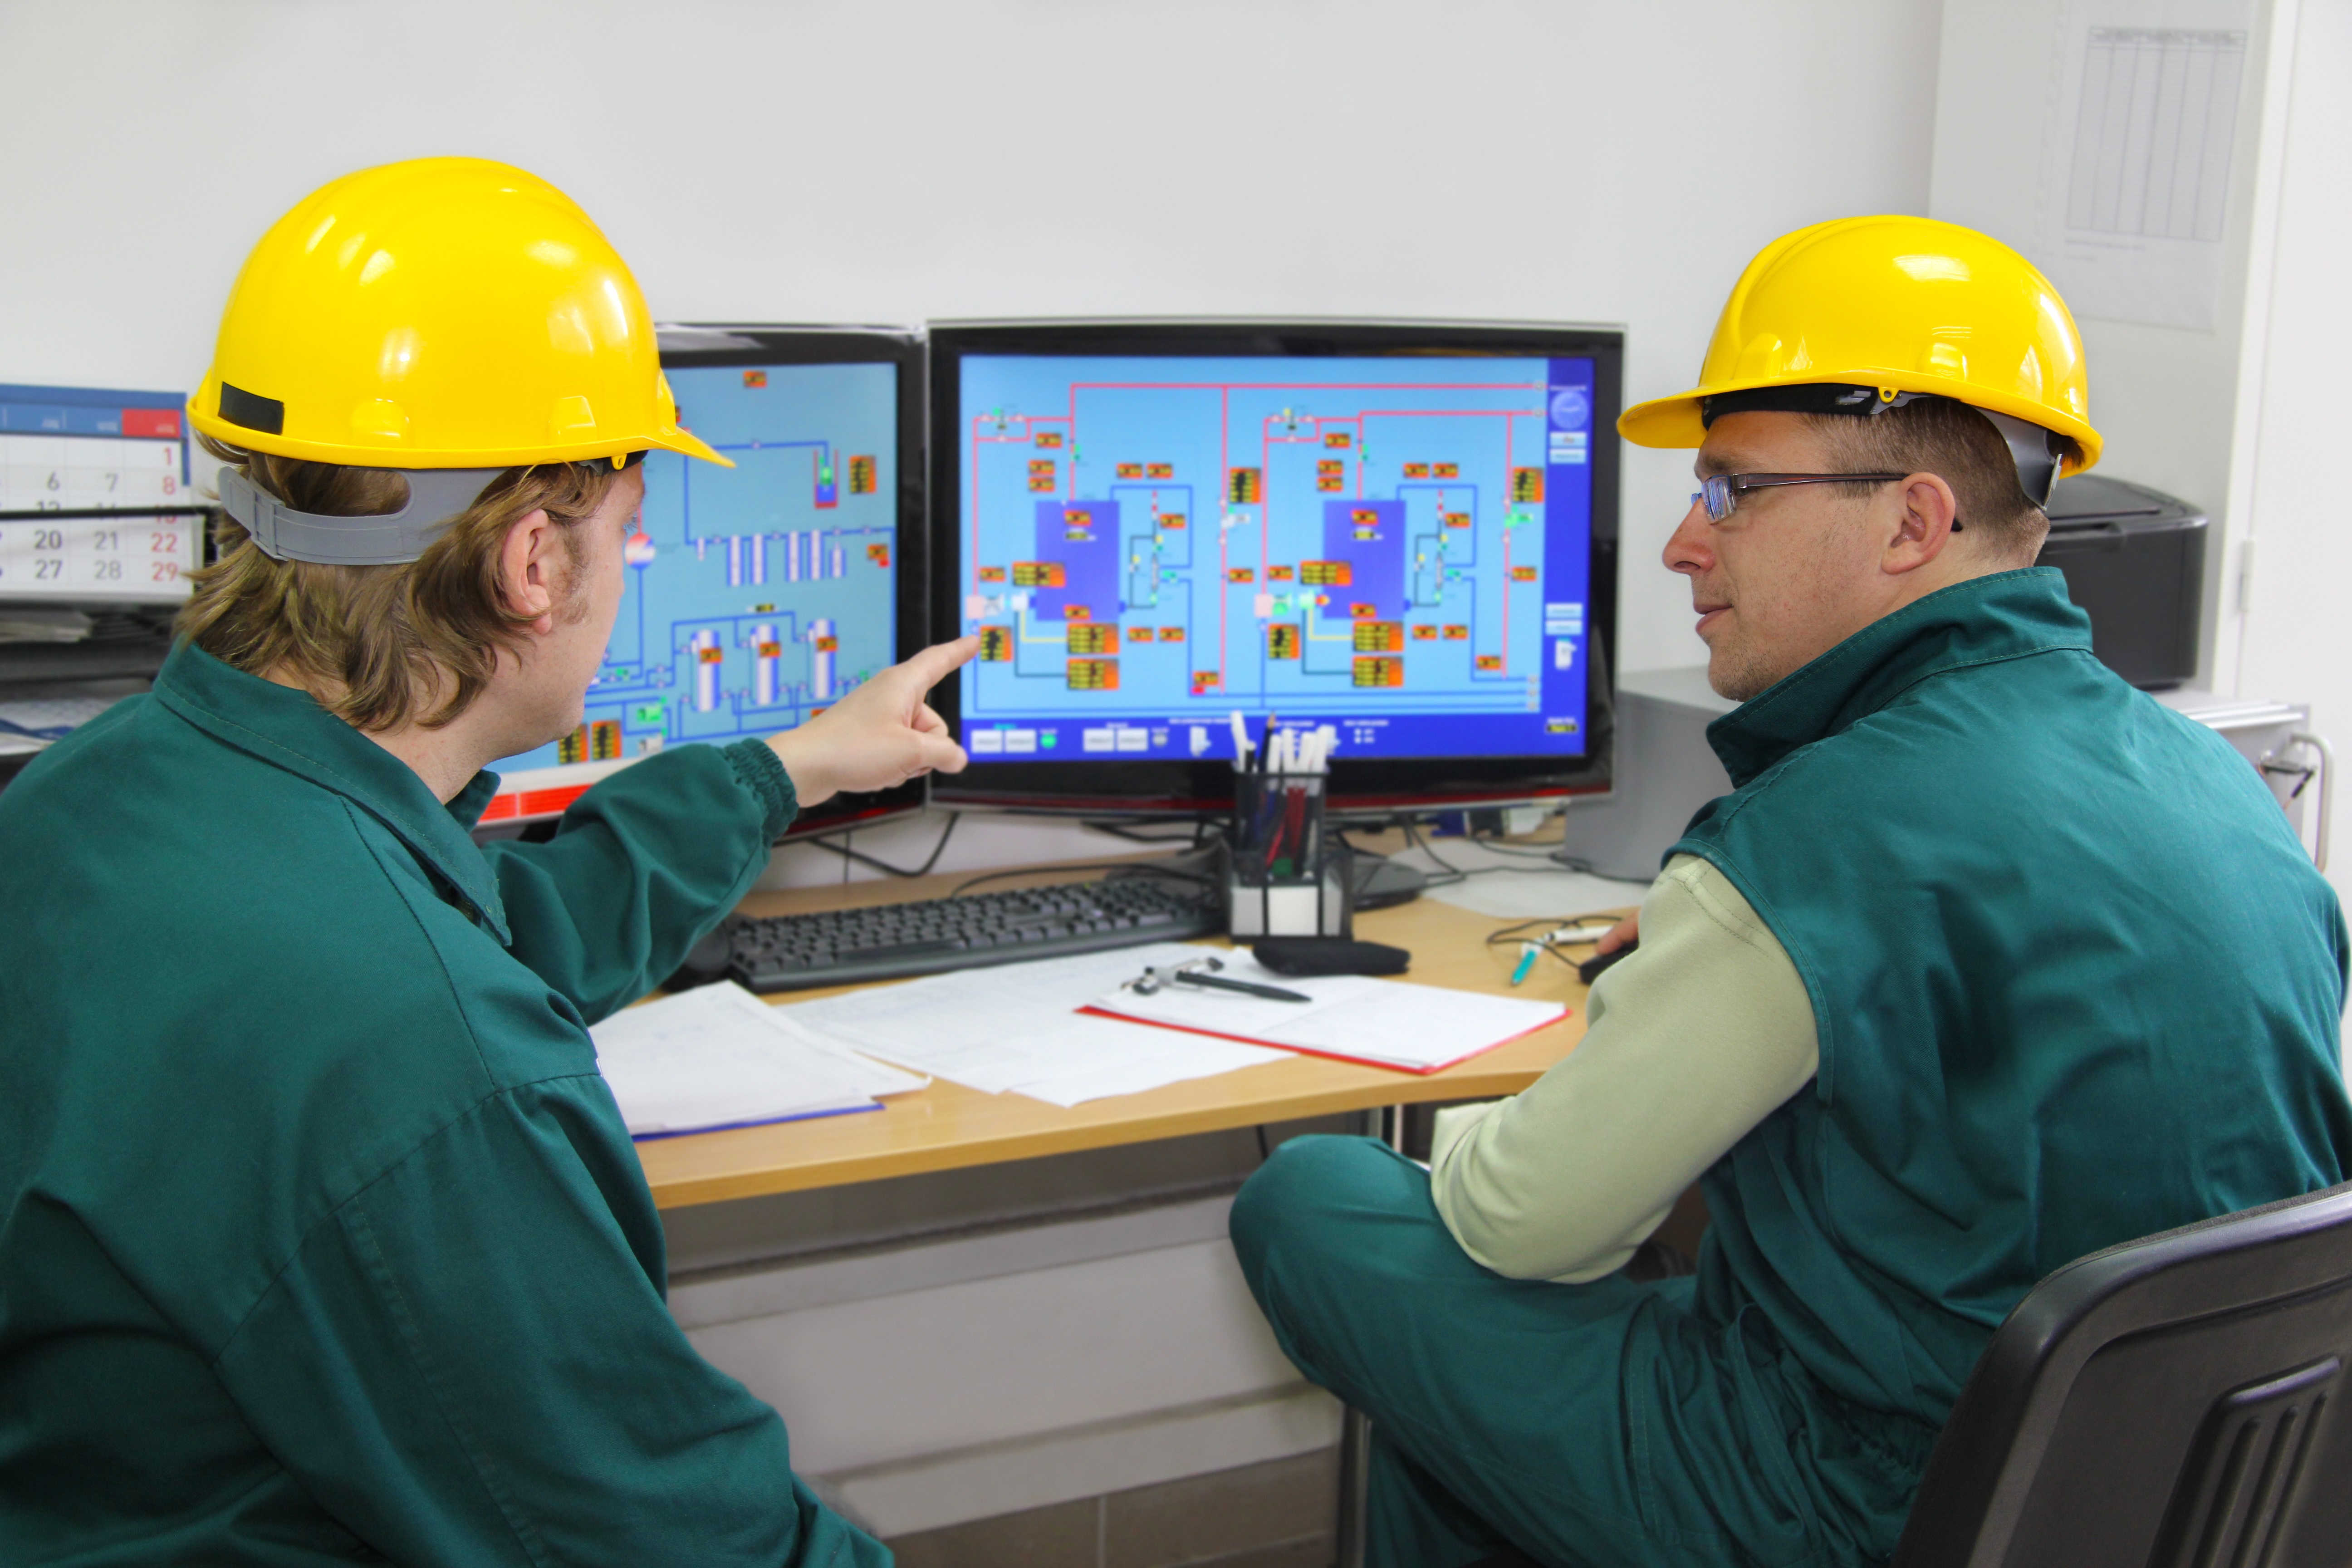 IoT Advances 2 shutterstock_100515940Two workers in hard hats monitor internet of things sensor networks in a manufacturing setting